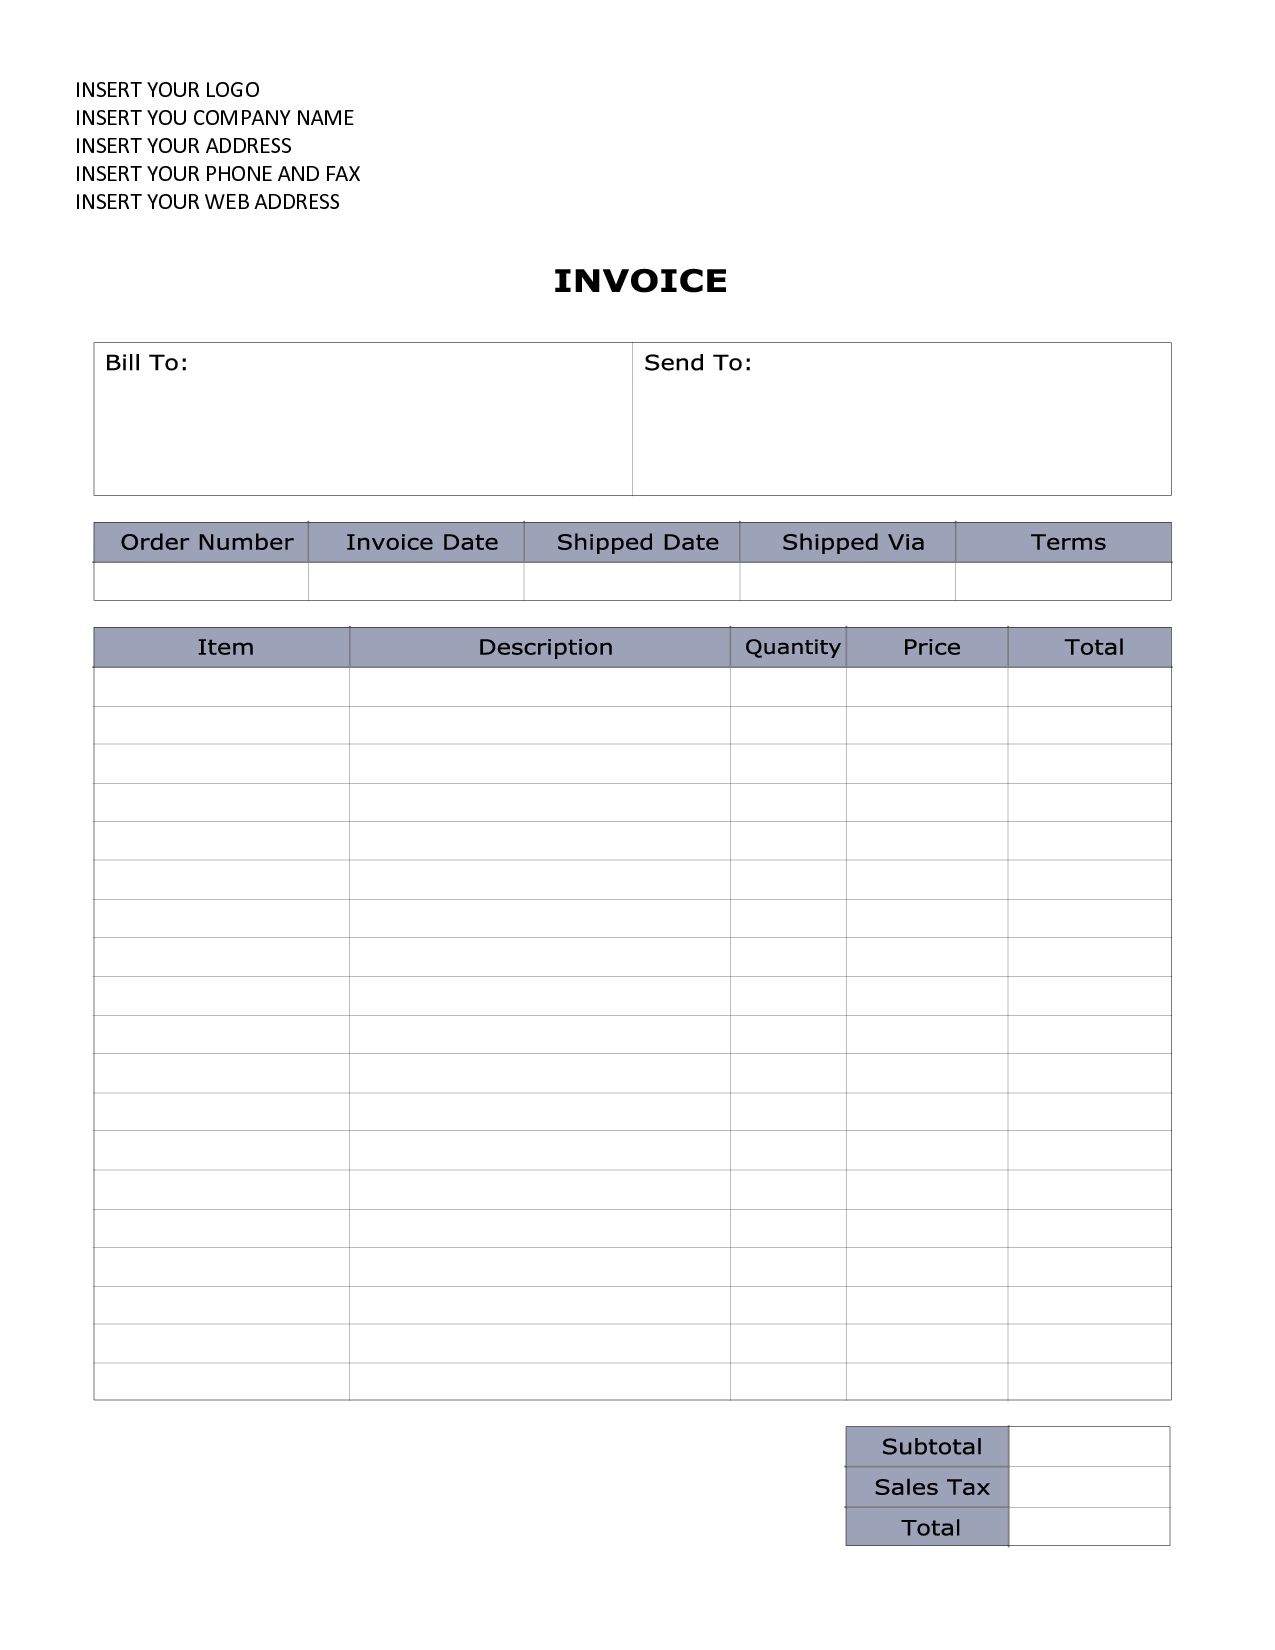 invoice in word word document invoice template sales invoice sample word olbghygl 1275 X 1650